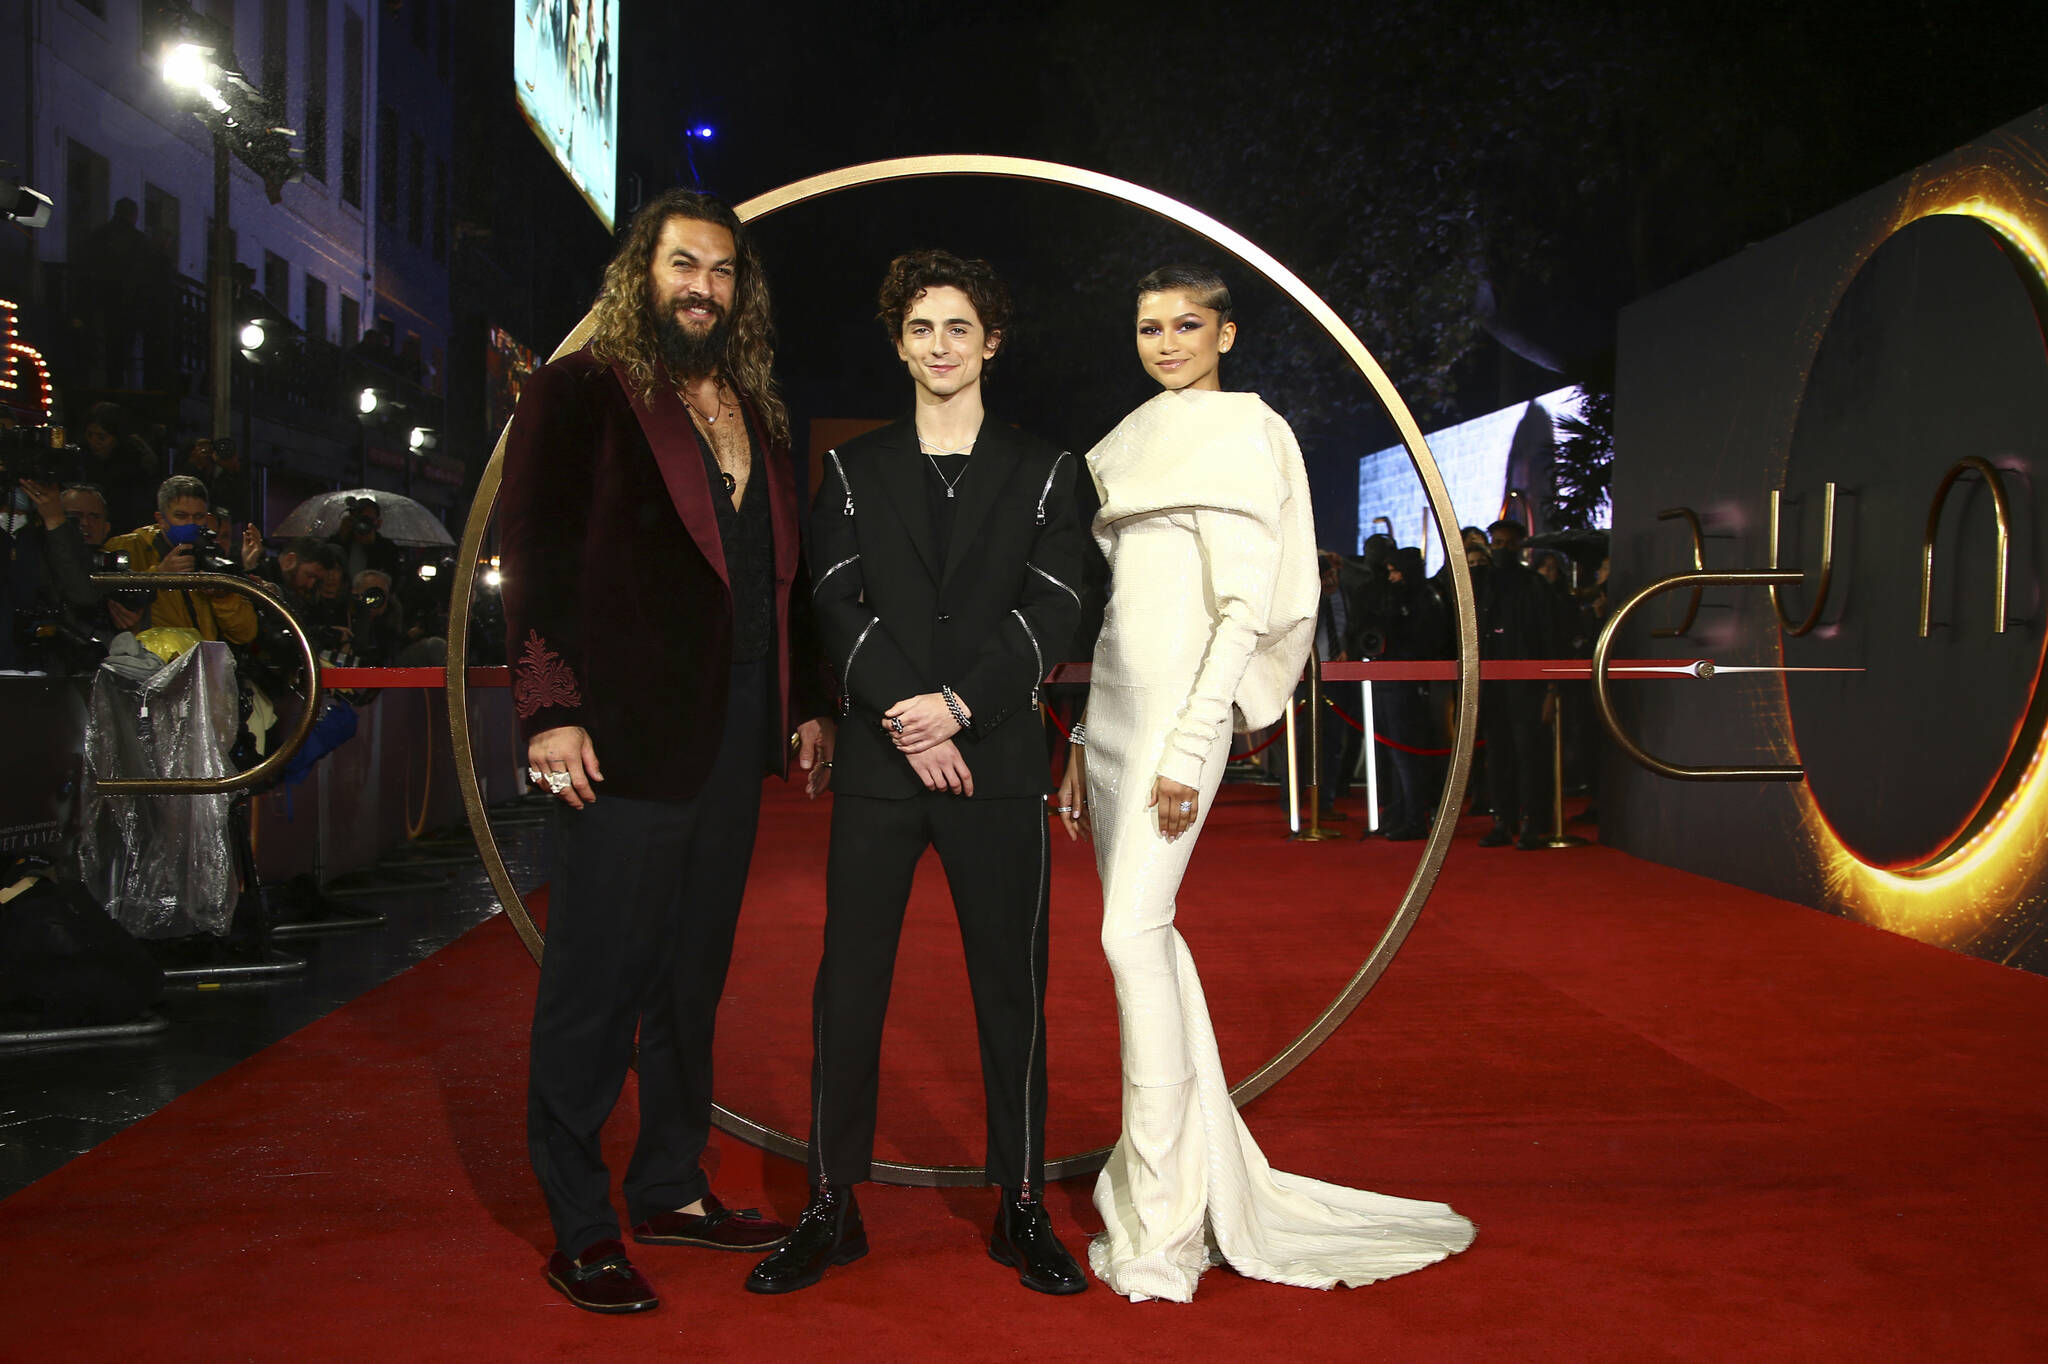 Jason Momoa, from left, Timothee Chalamet, and Zendaya pose for photographers upon arrival at the premiere of the film ‘Dune’ on Monday, Oct. 18, 2021 in London. (Photo by Joel C Ryan/Invision/AP)